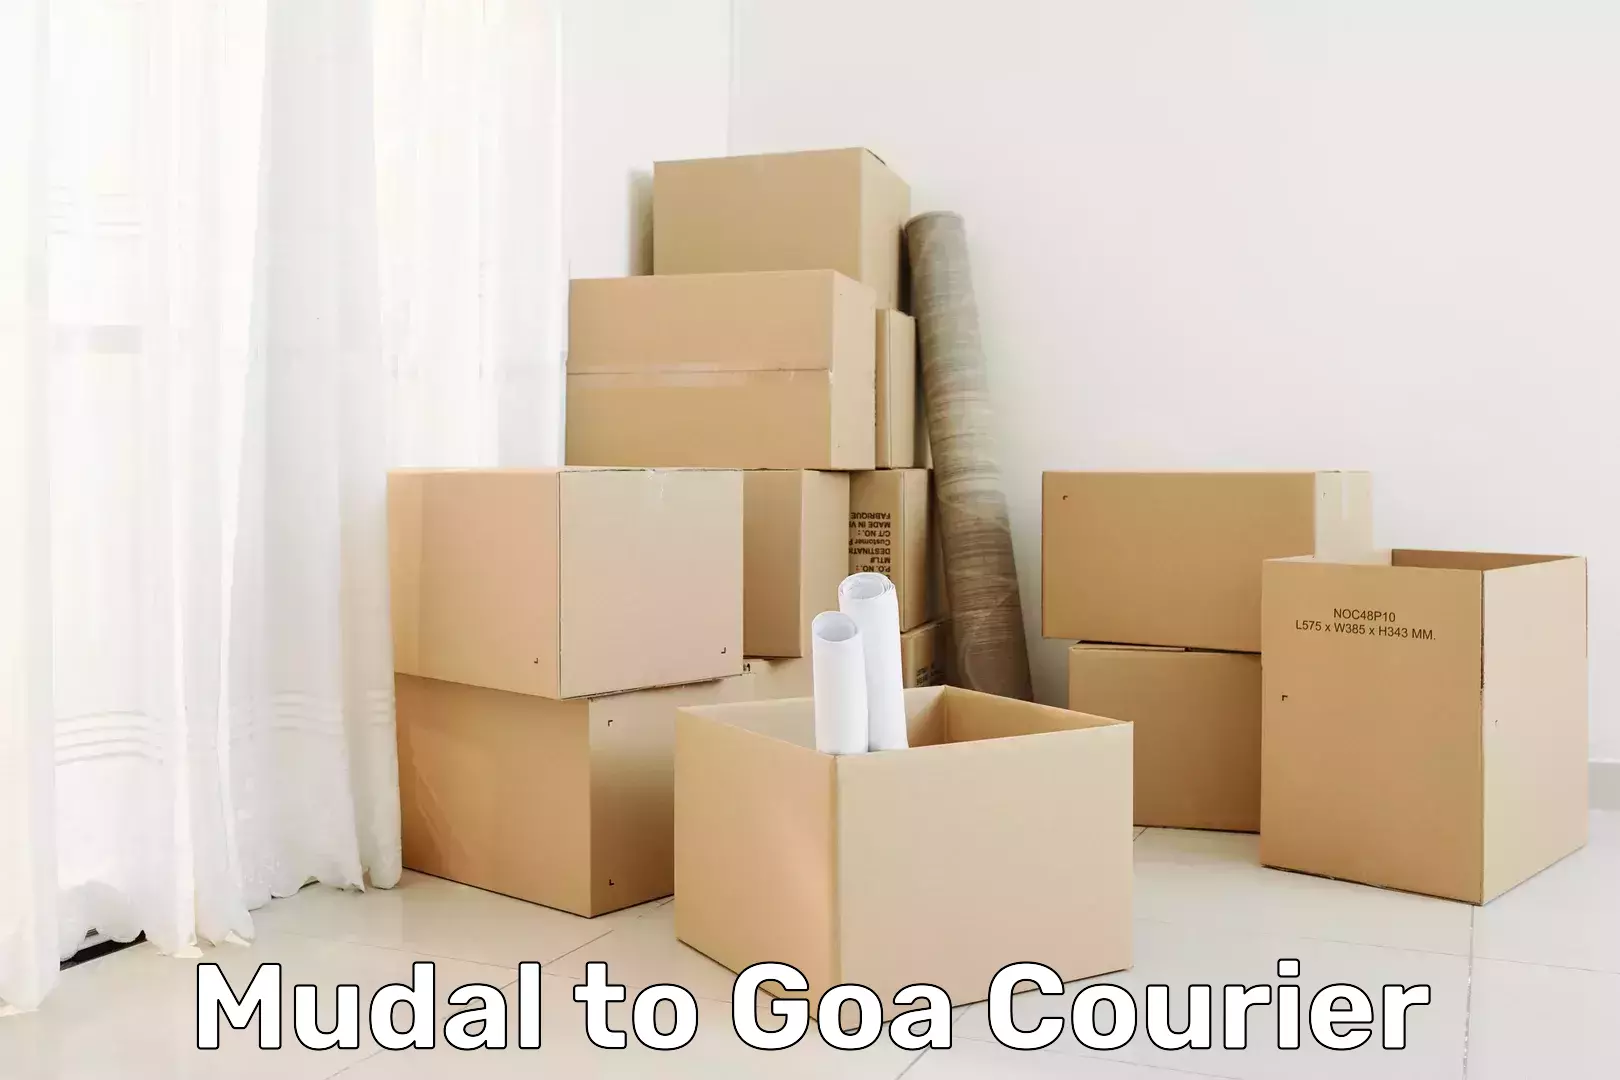 Nationwide courier service Mudal to Goa